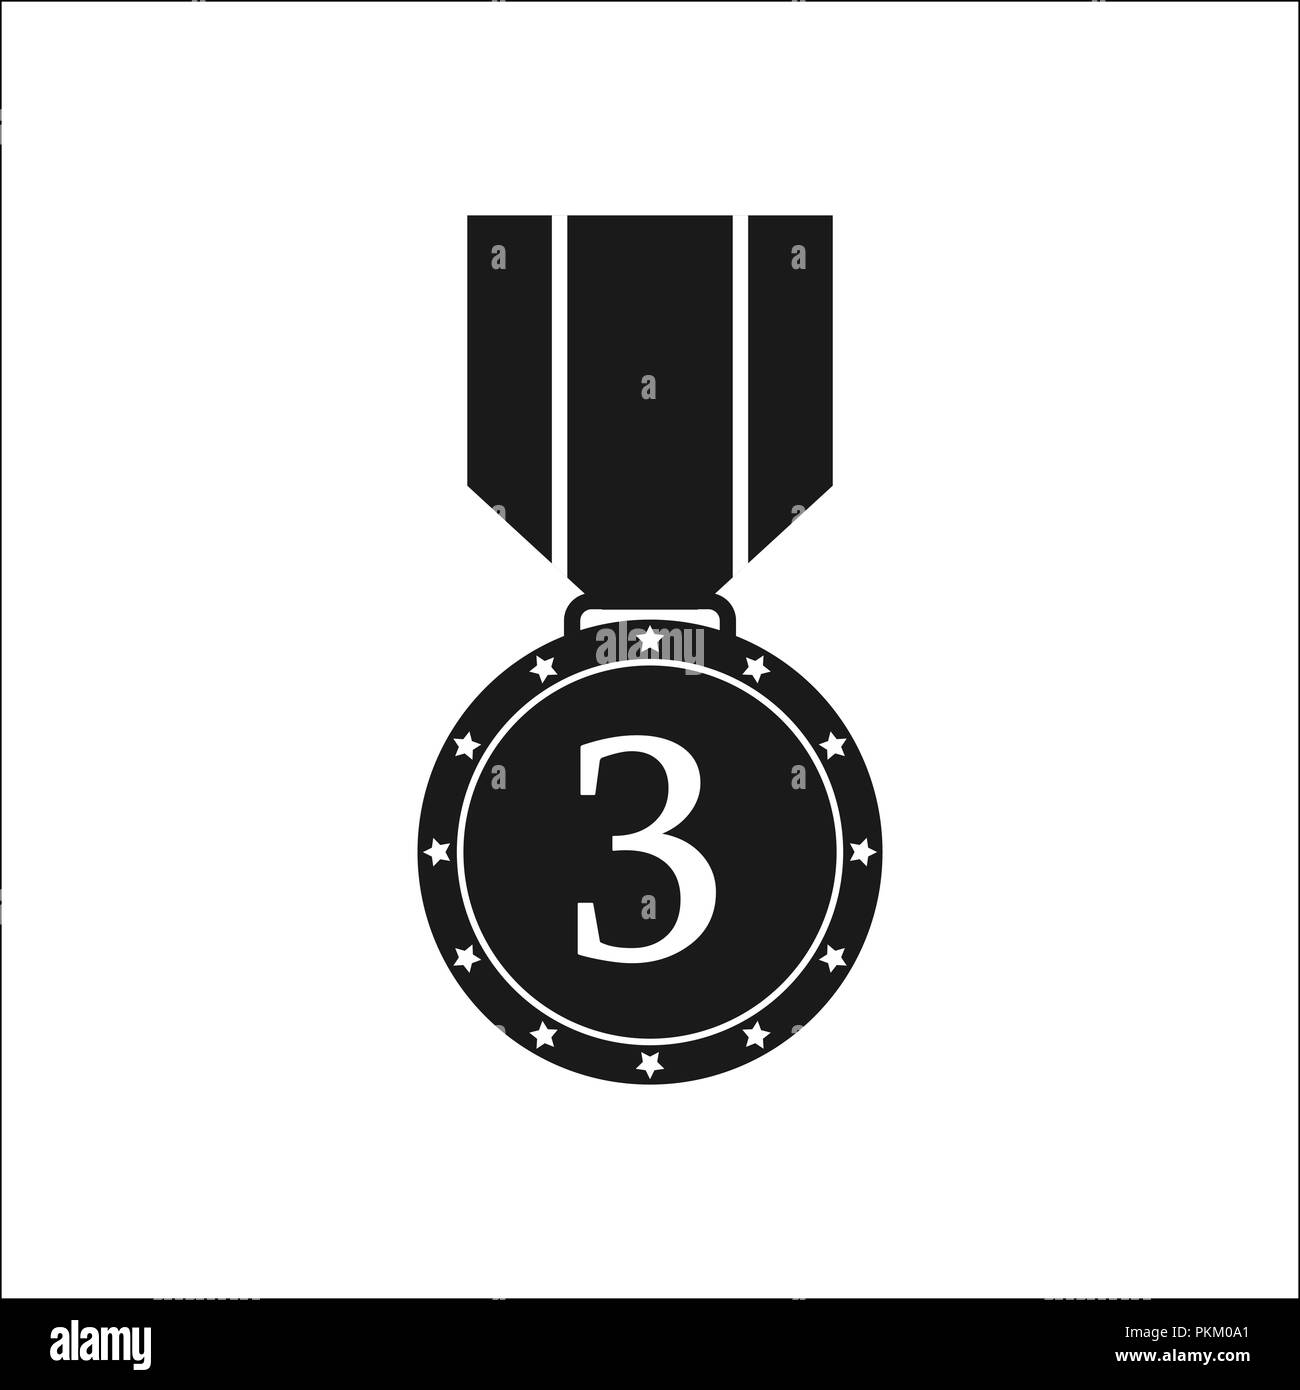 Medal icon with the number three, flat black and white image Stock Vector